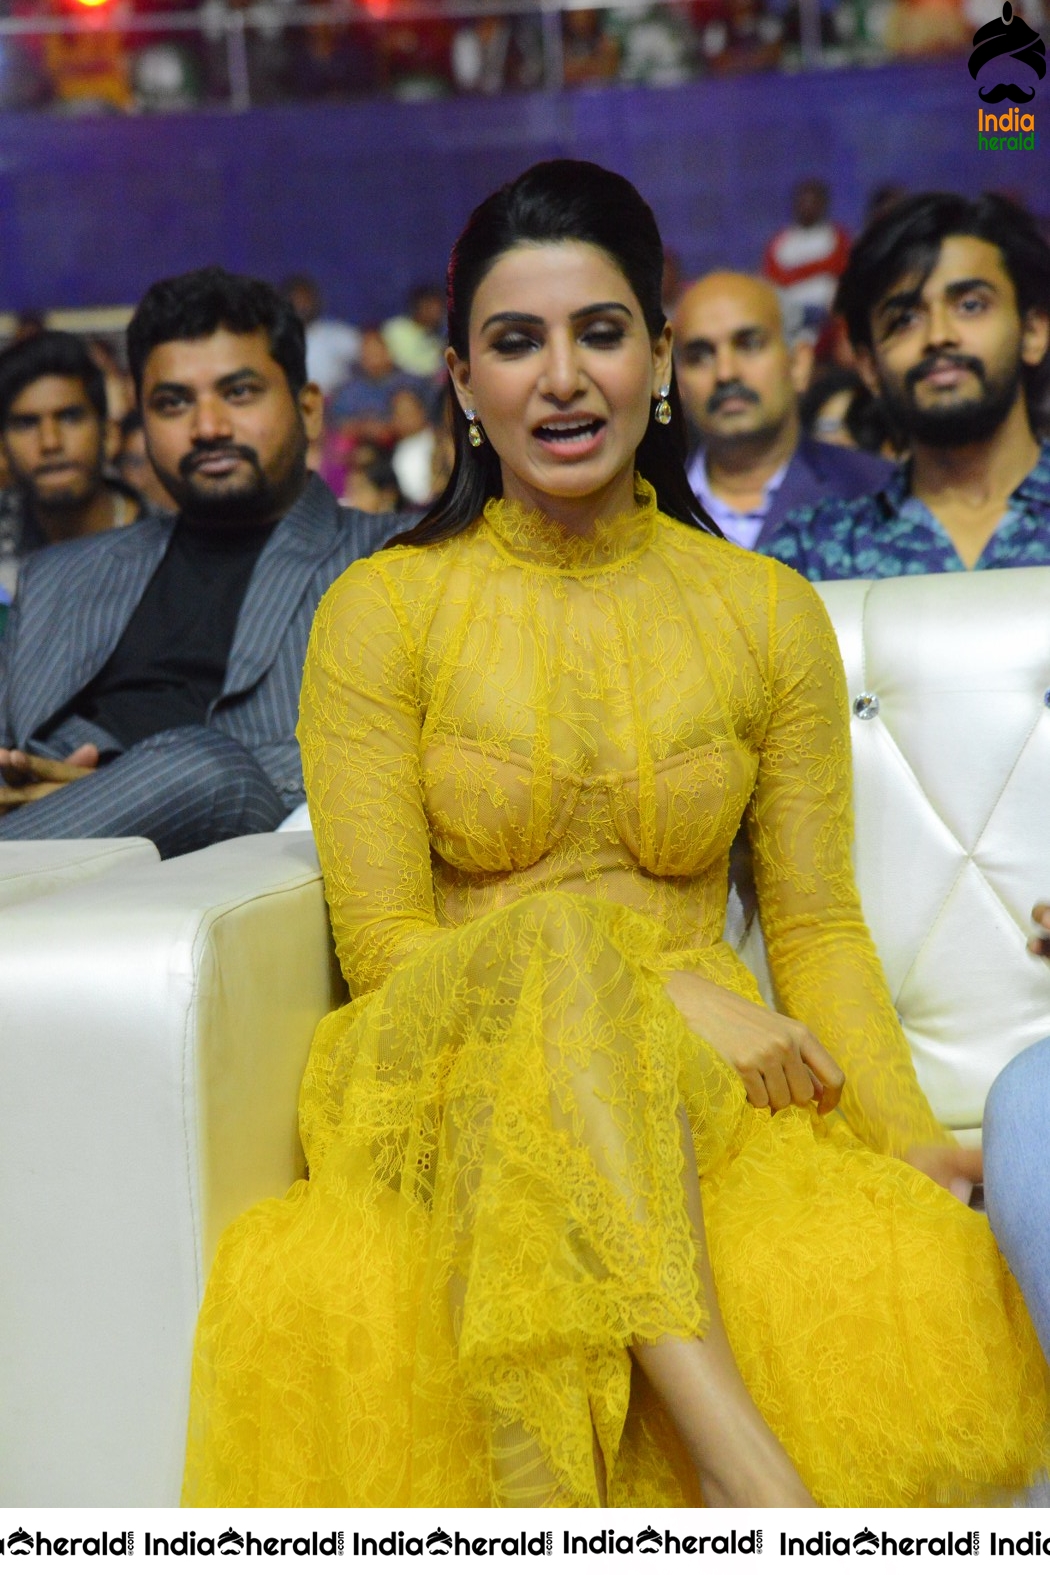 Sizzling Samantha Oozing Hotness in Transparent Yellow Outfit Set 1